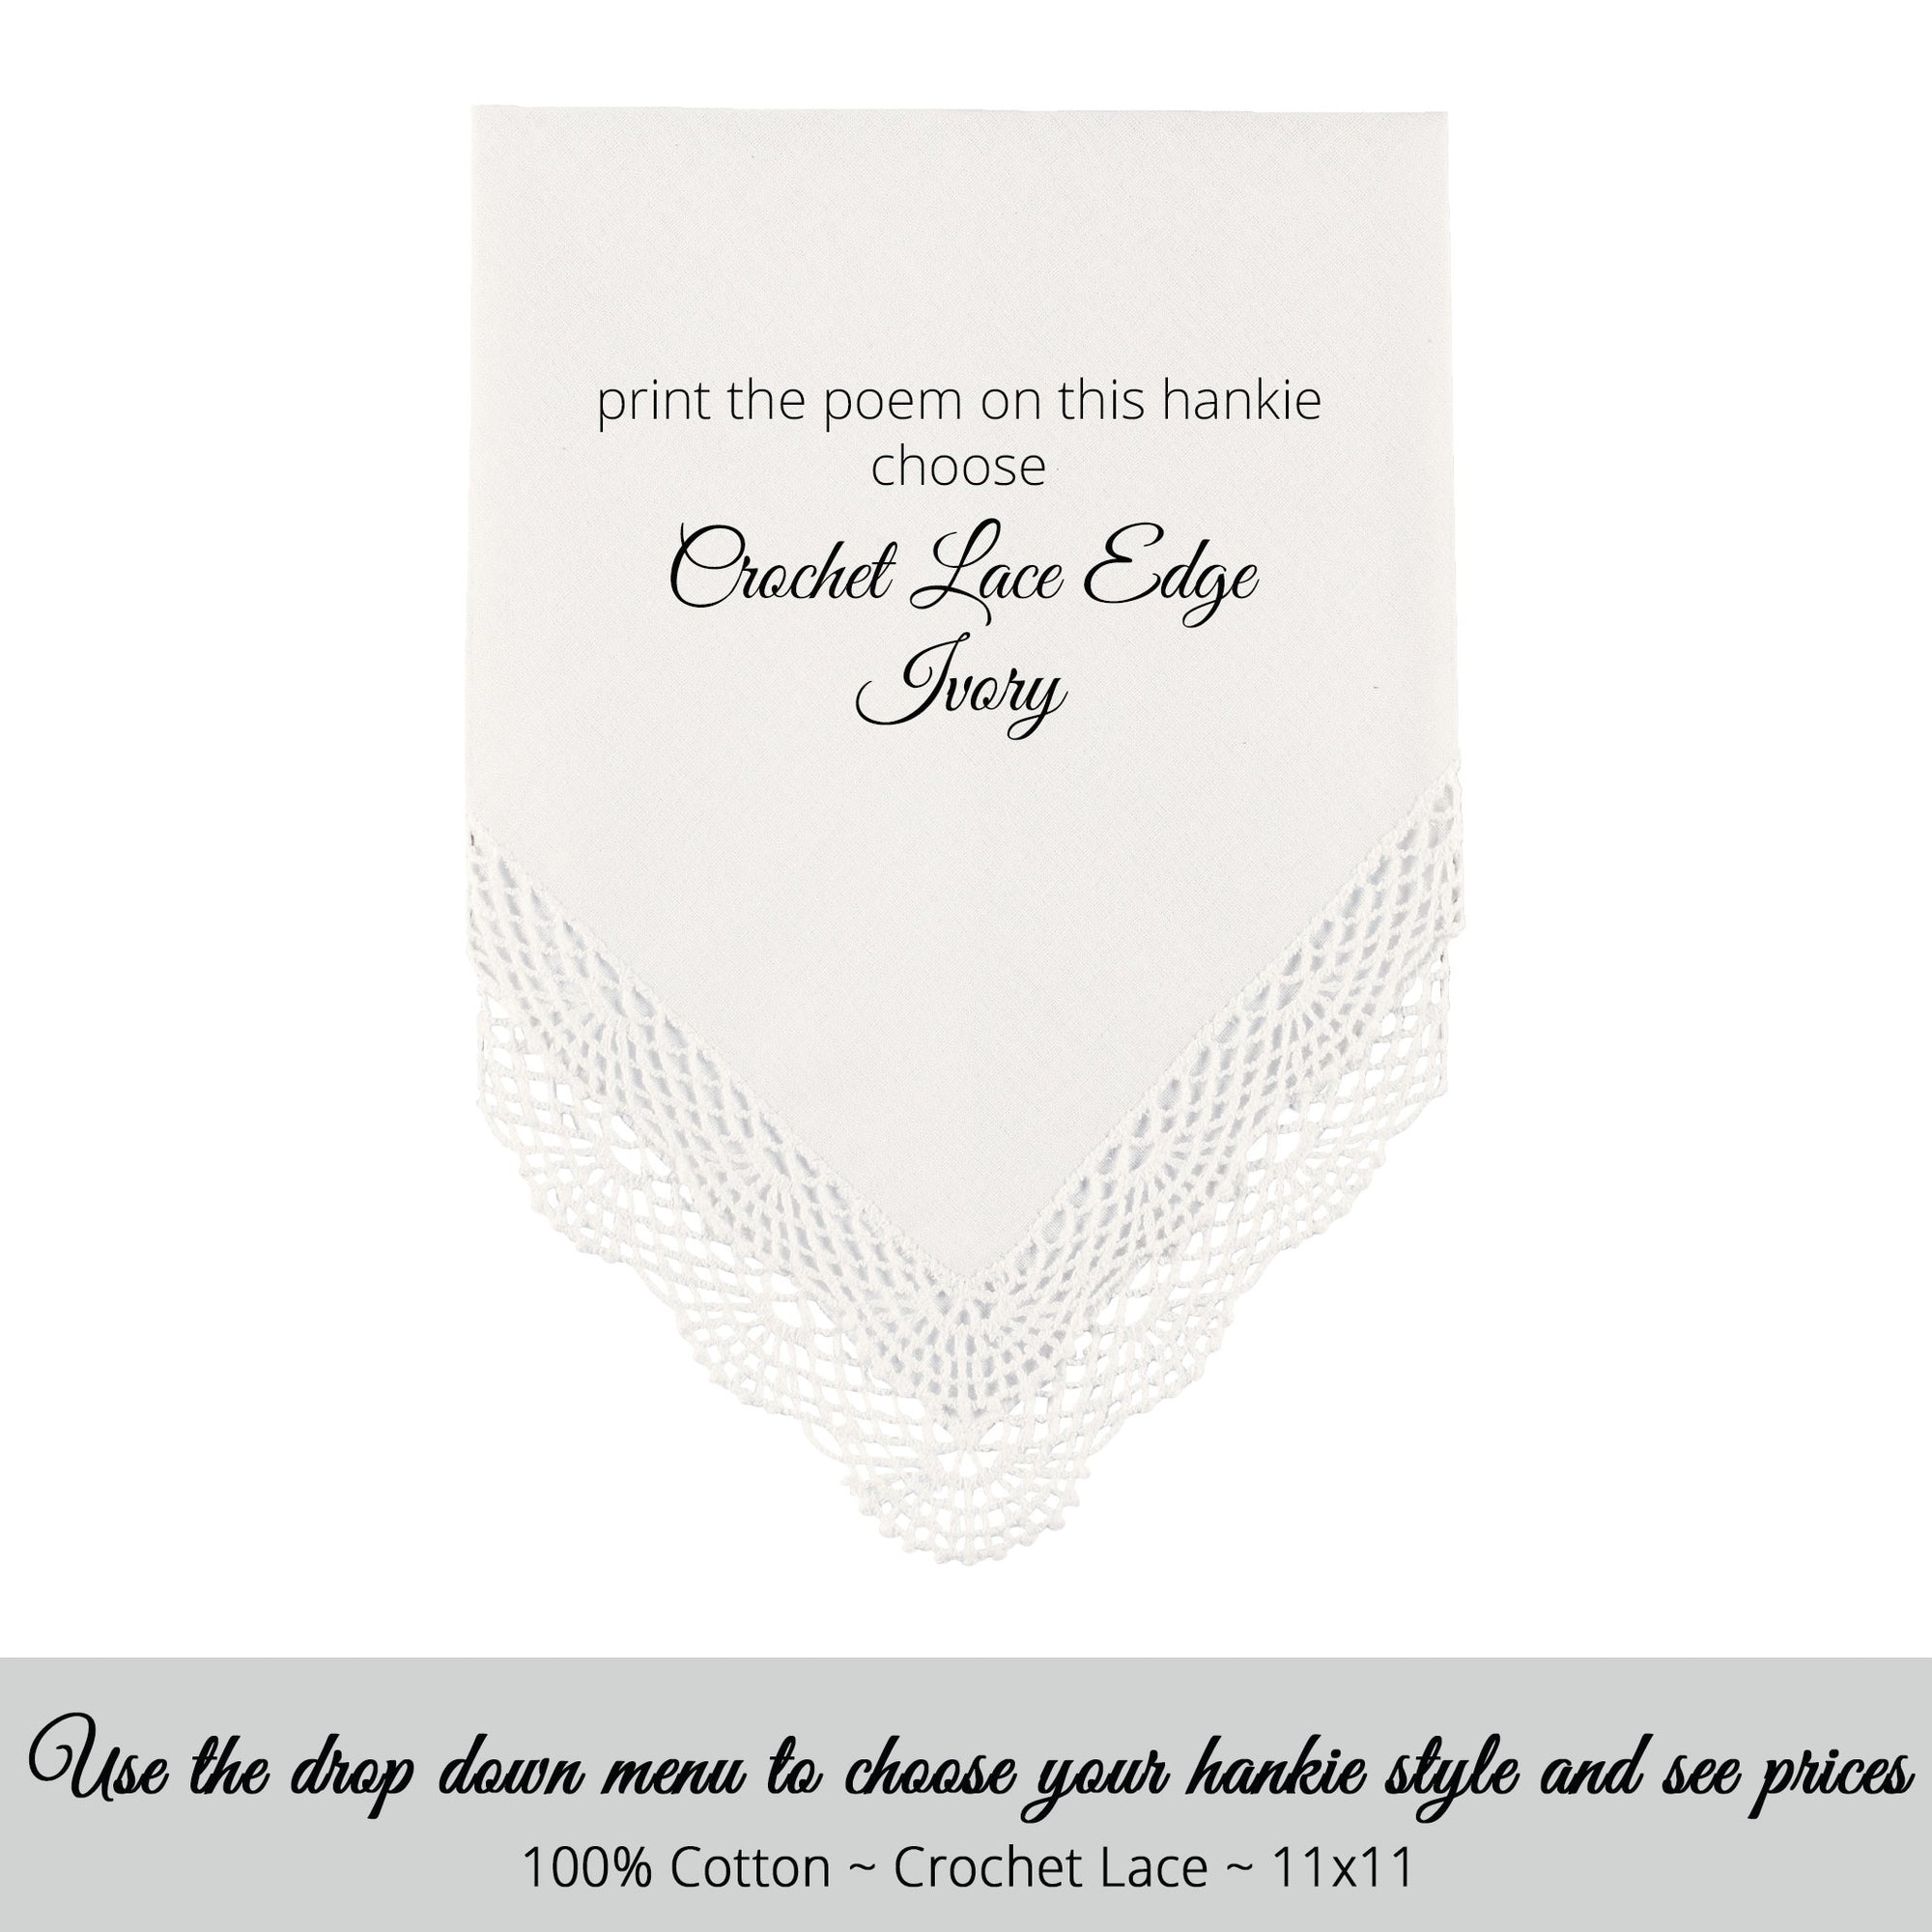 Wedding handkerchief ivory with crochet lace edge for the grandmother of the groom poem printed hankie